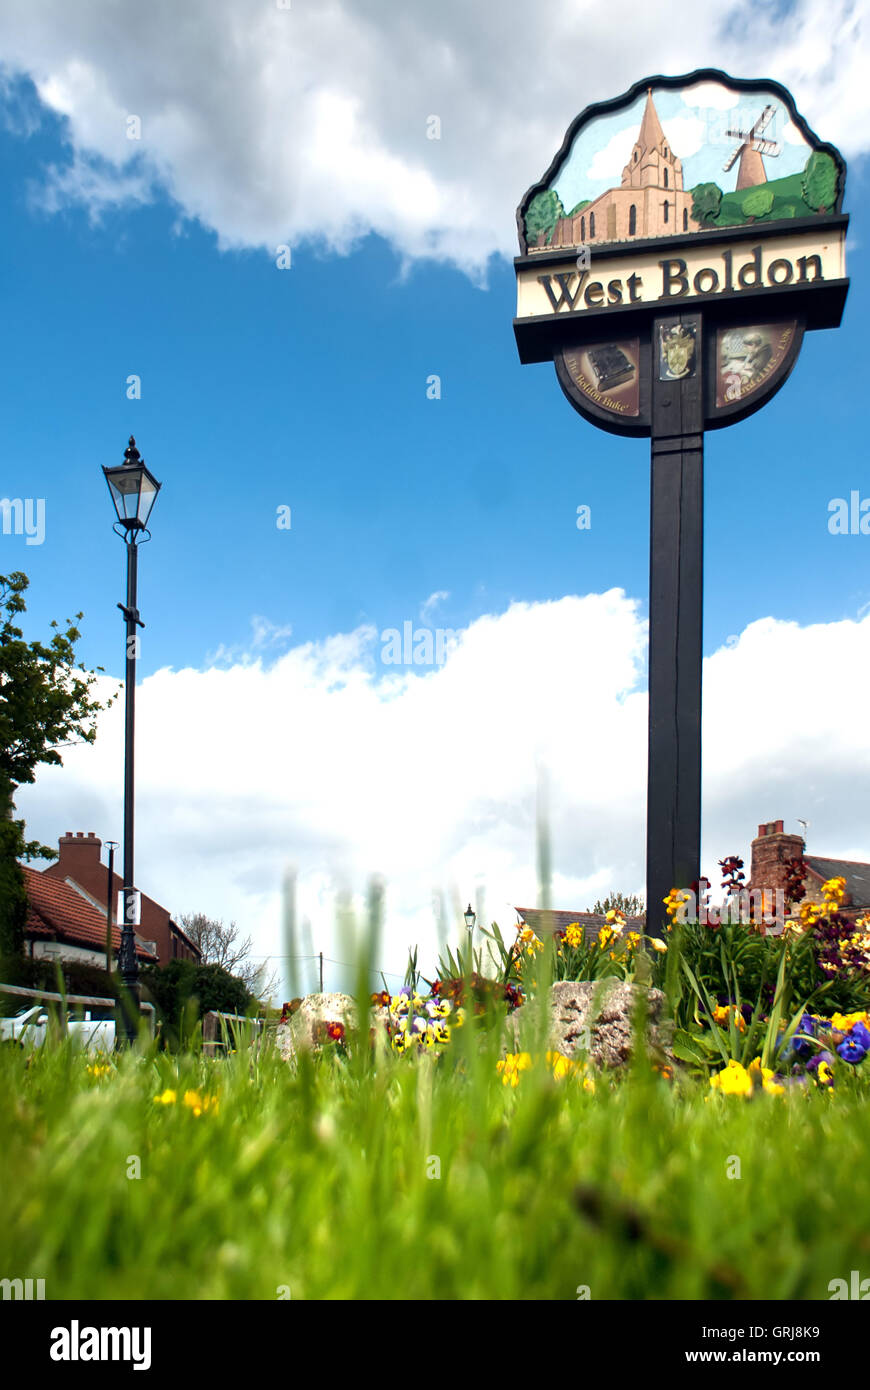 Signpost for West Boldon, South Tyneside Stock Photo